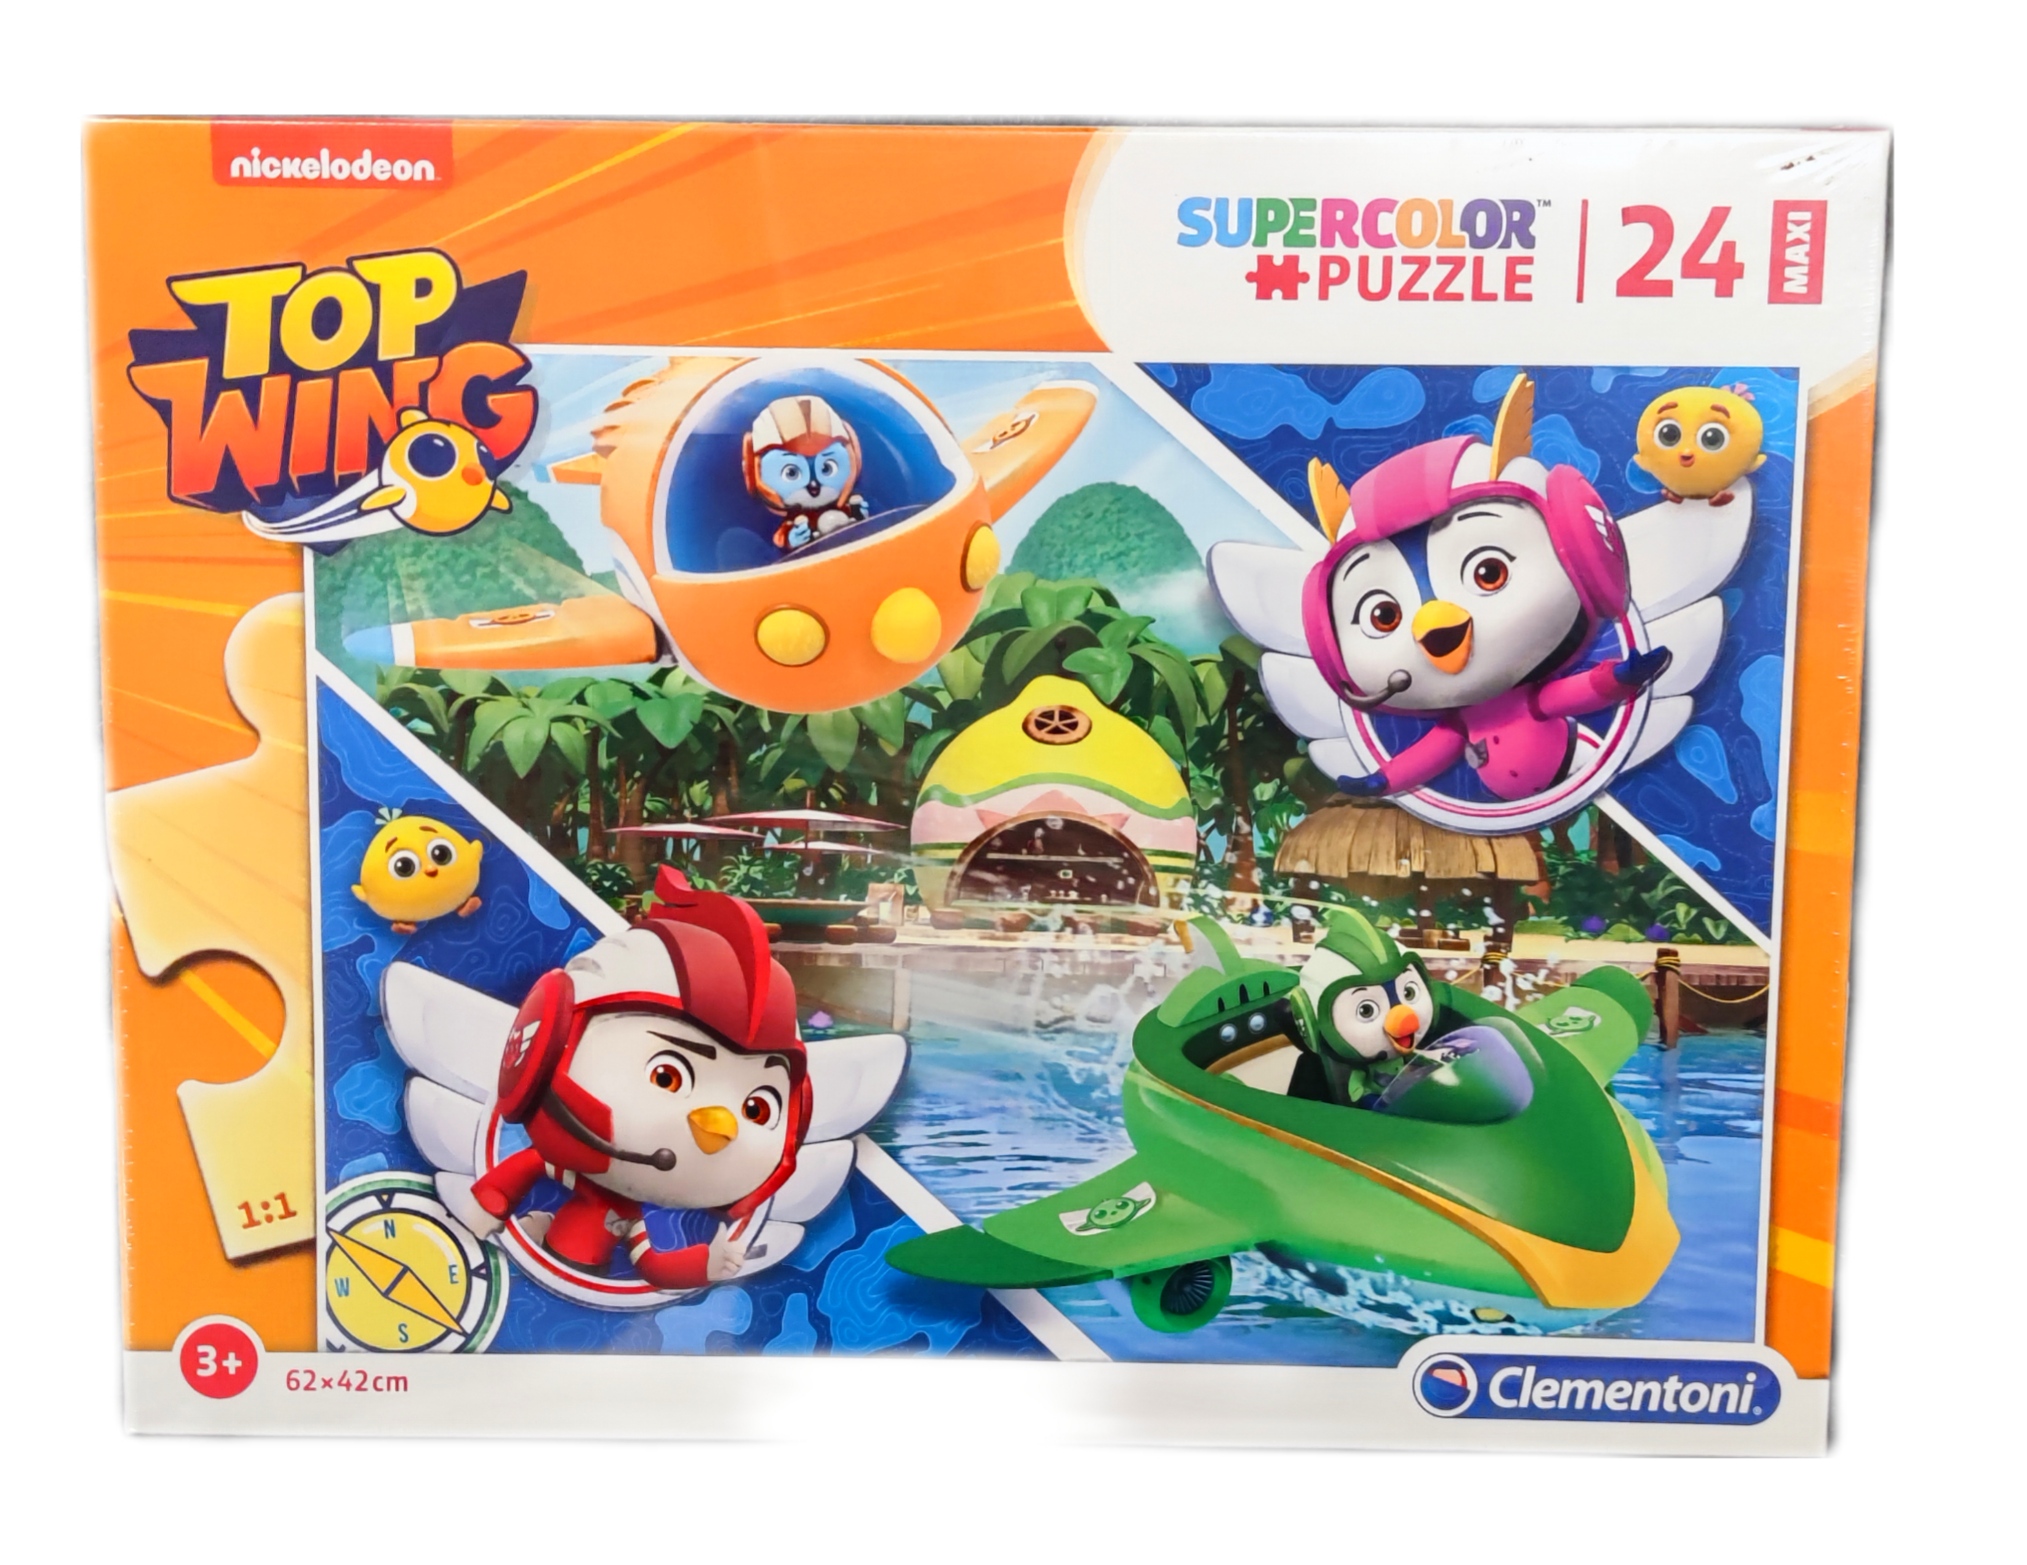 Top Wings Puzzle 24 Teile » Sun-side-store Onlineshop » Sun-side-store